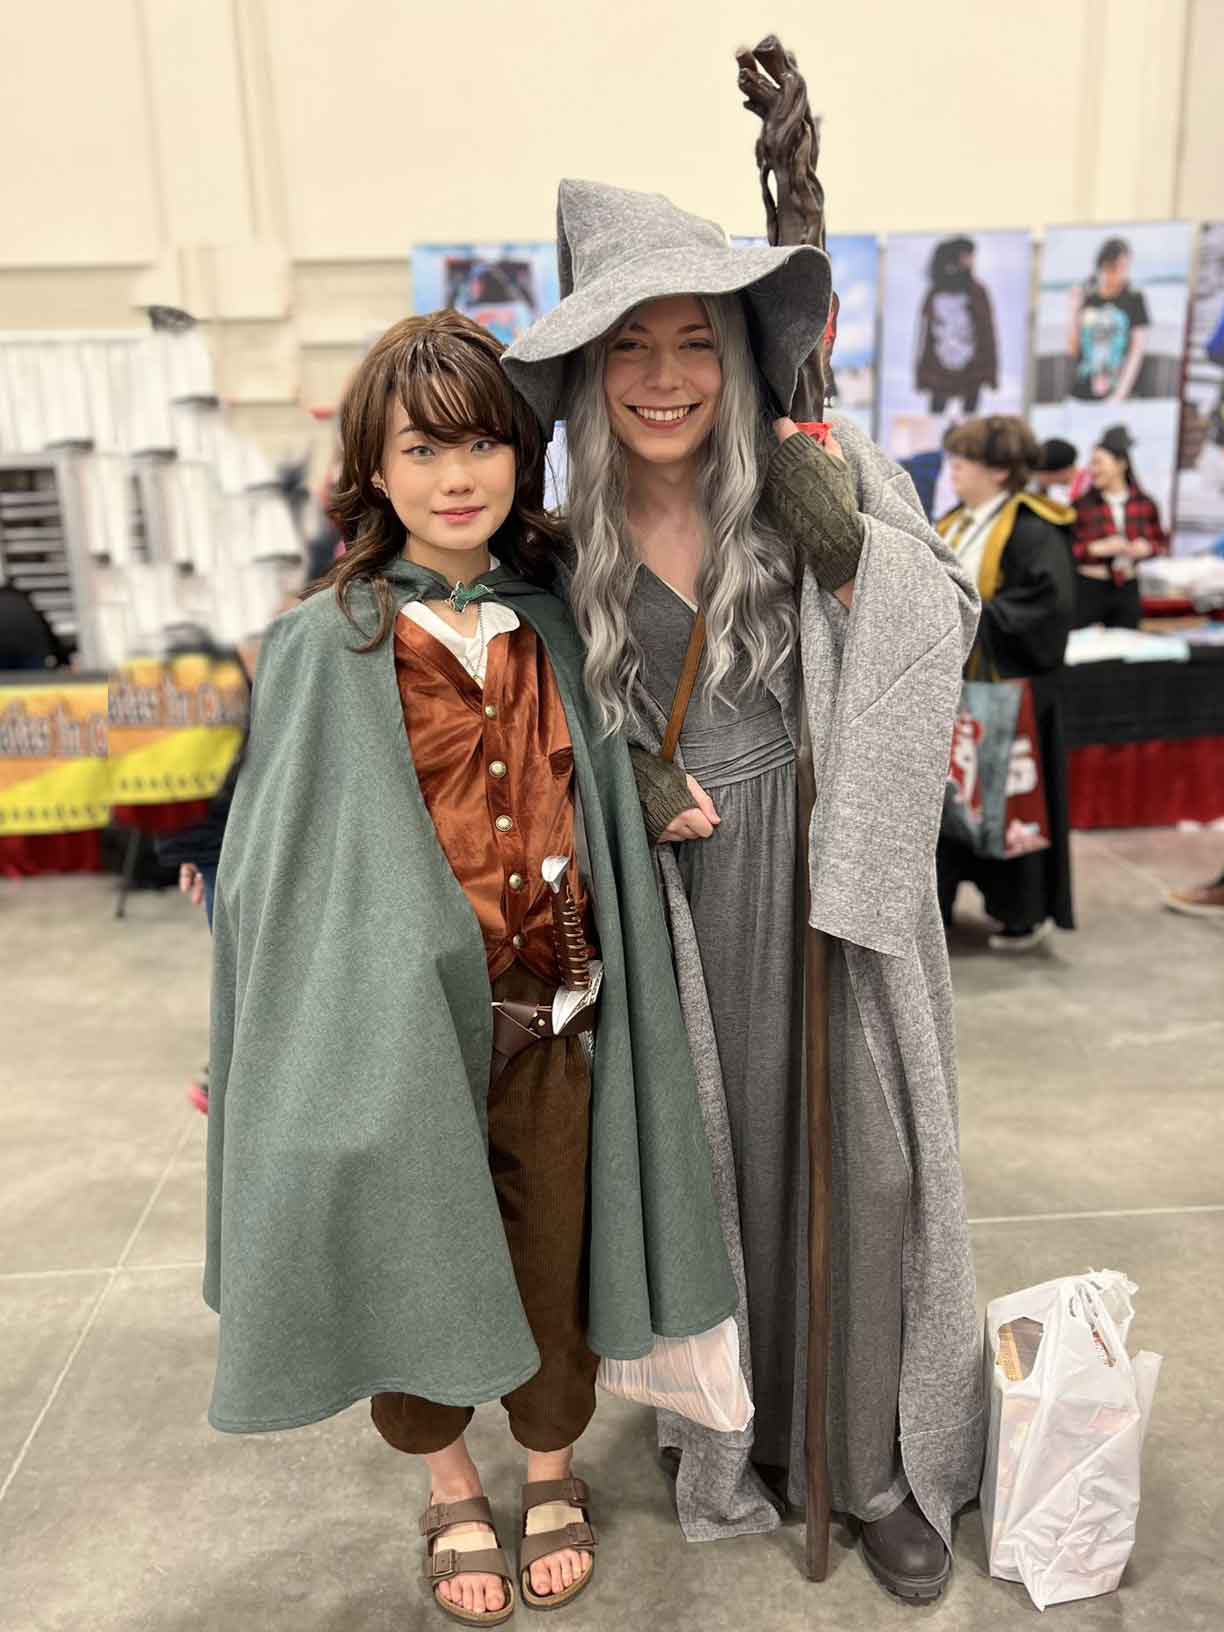 Lord of the Rings Calgary Expo 2022 Cosplay